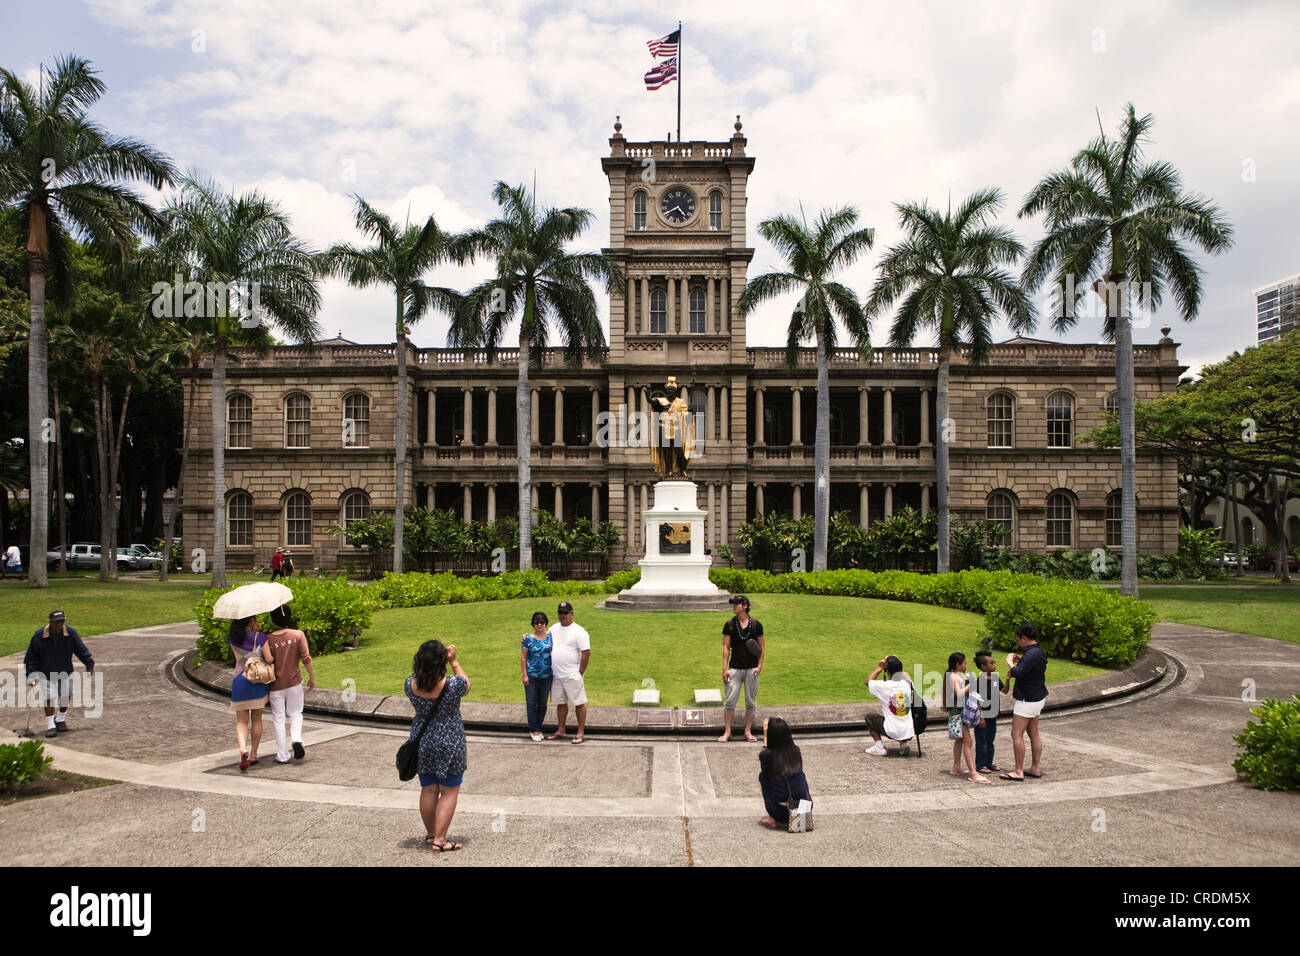 Korean and Japanese tourists taking photographs in front of the statue of first Hawaiian King Kamehameha I, 1758 - 1819, and the Stock Photo